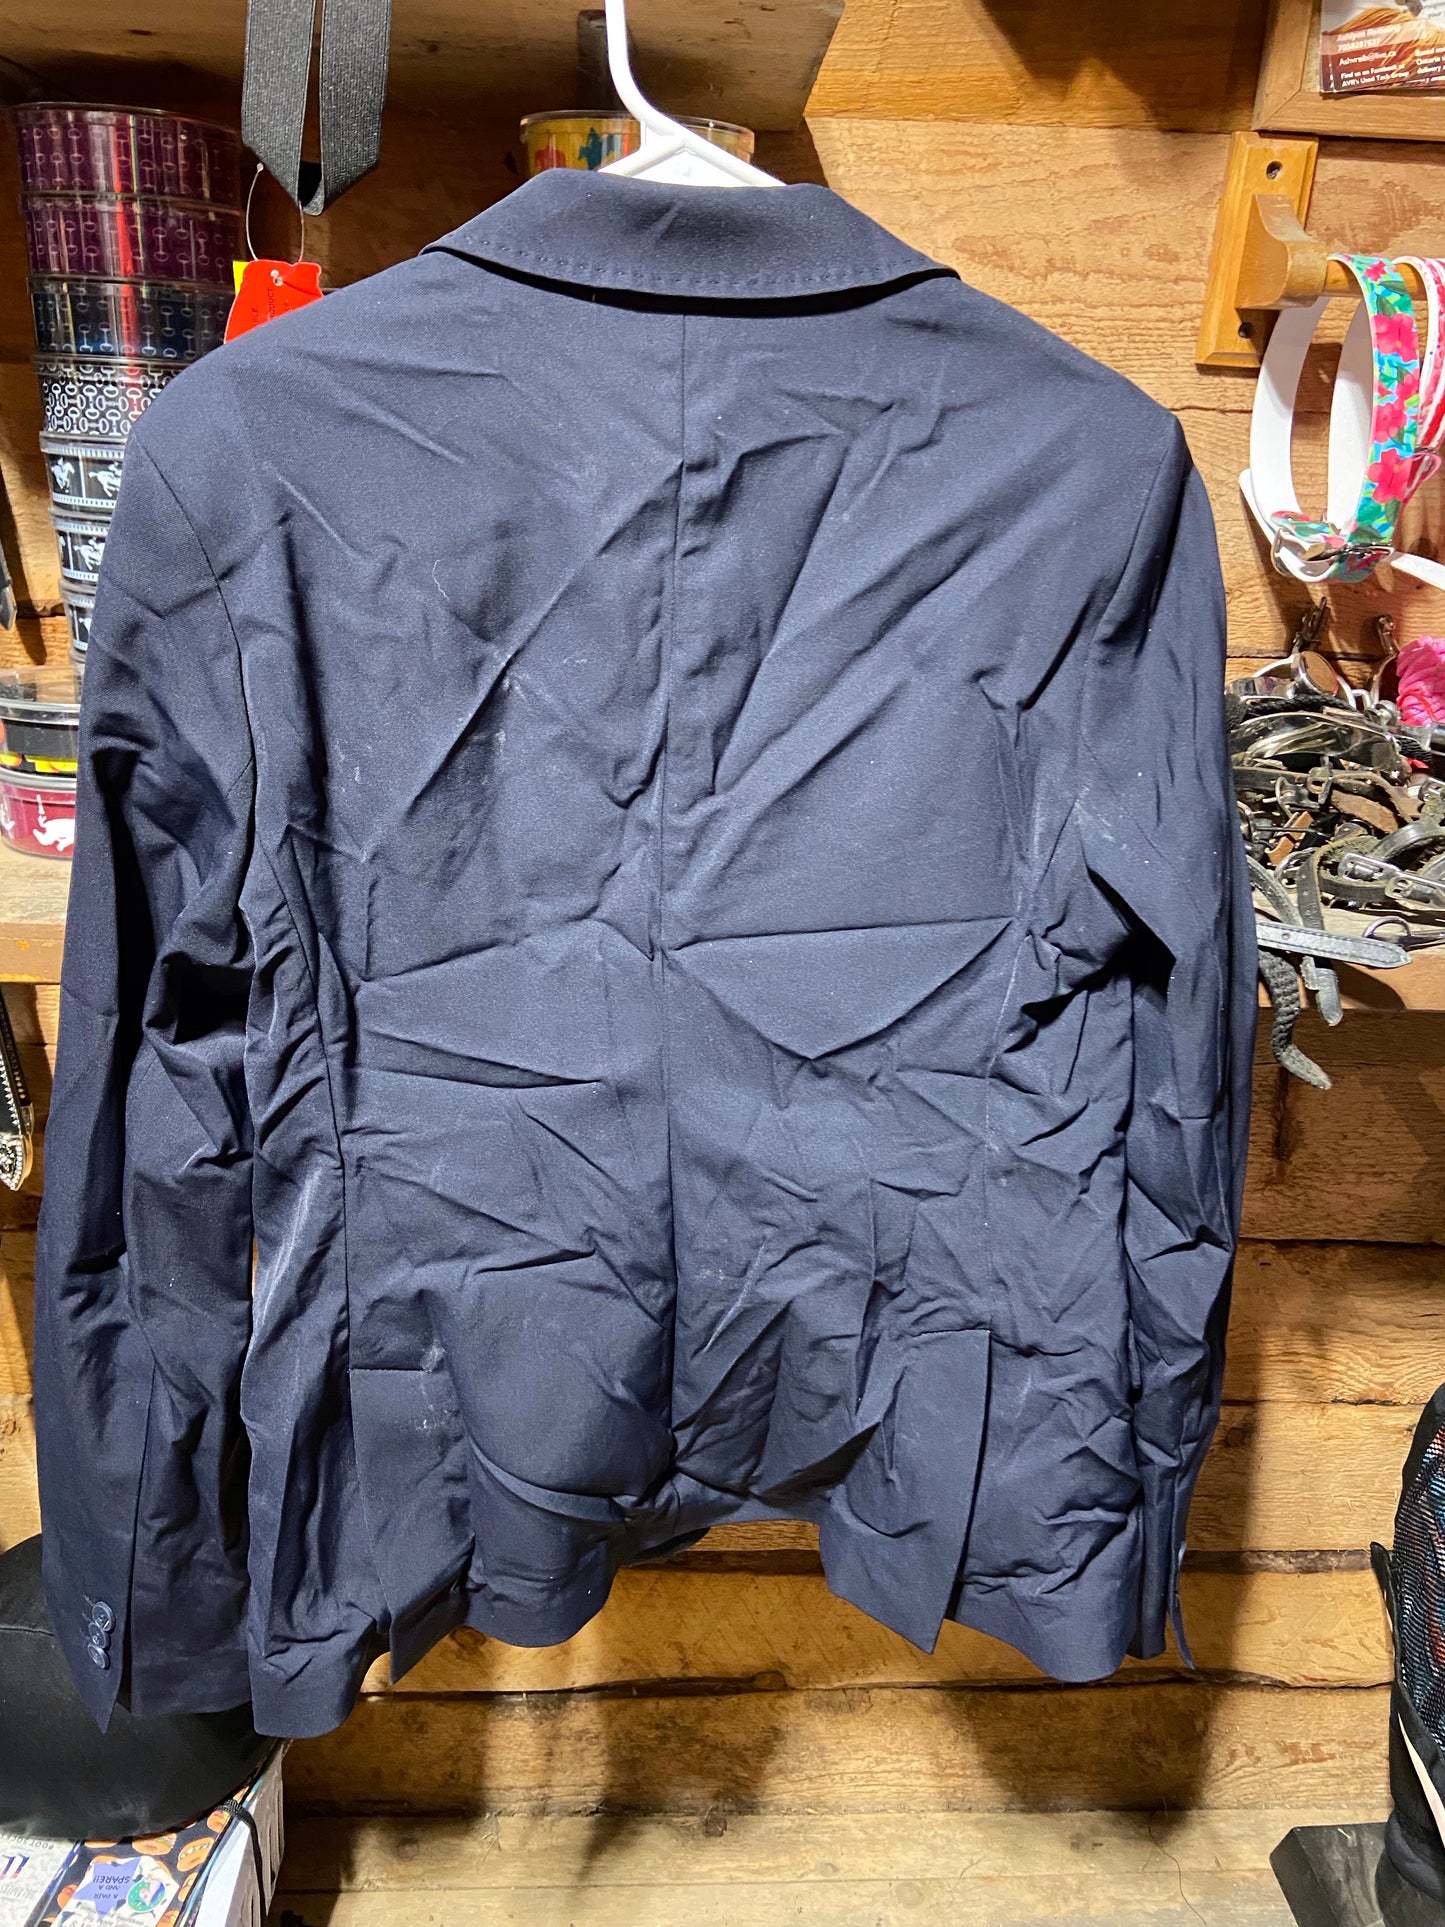 Gpa double clear show jacket size 42